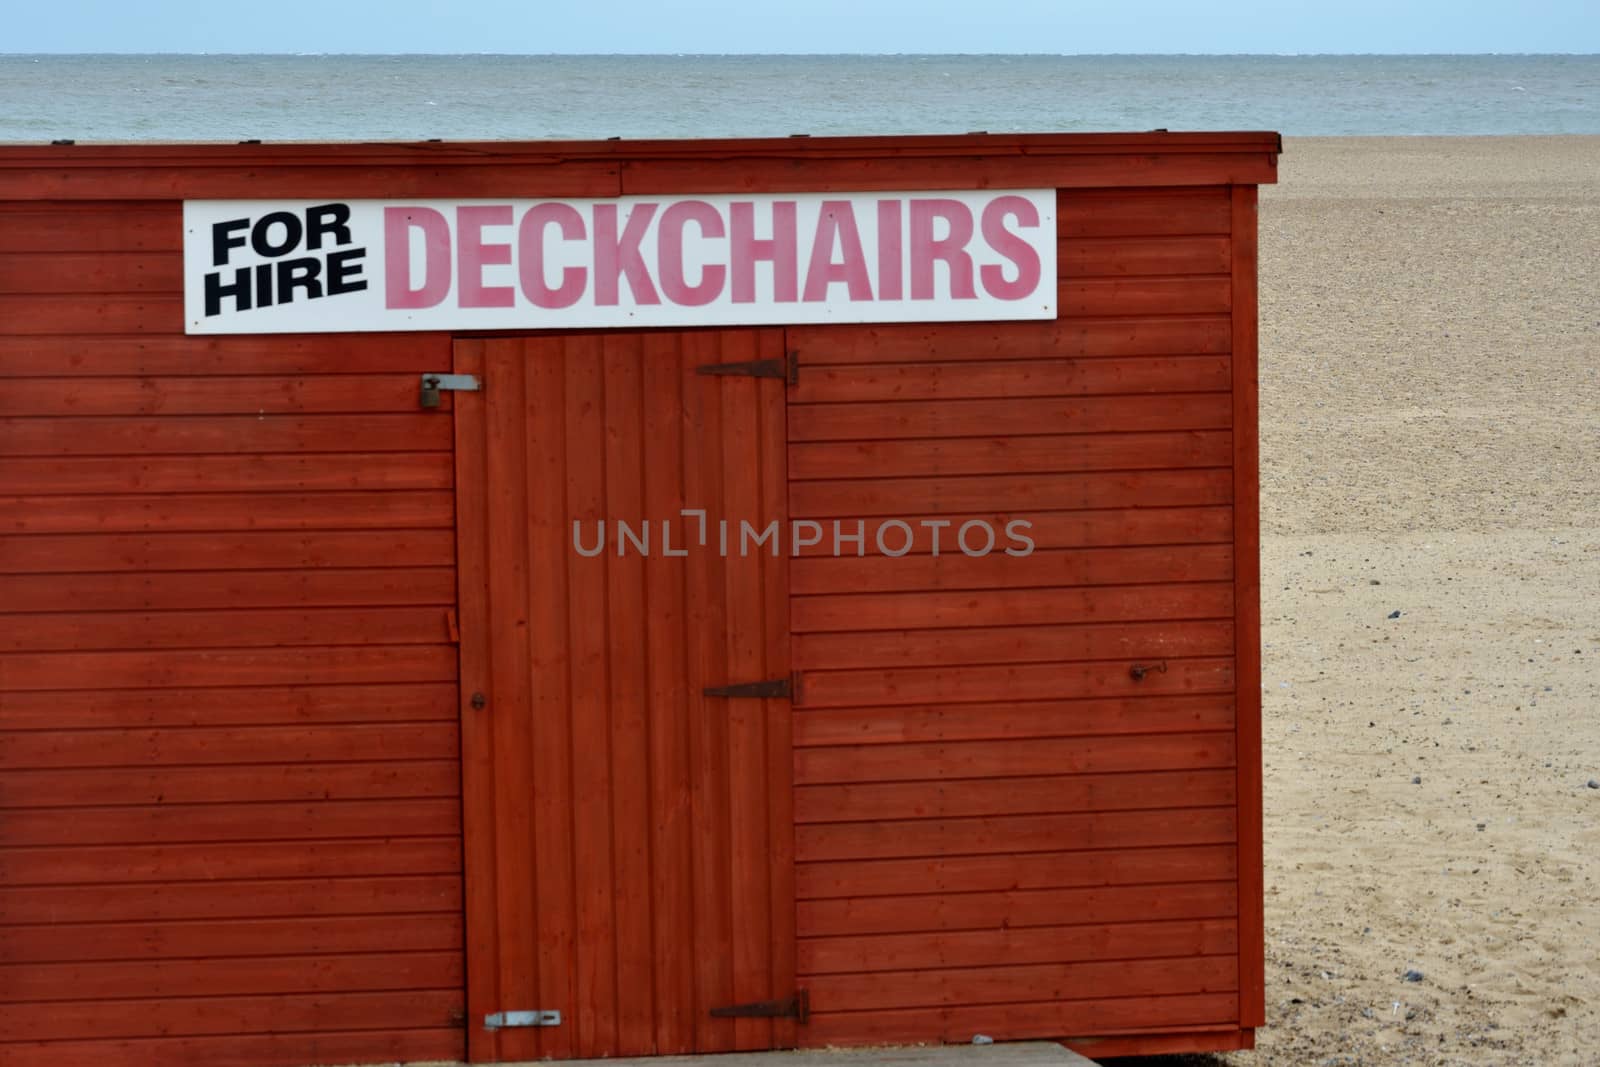 Deckchair hire shed